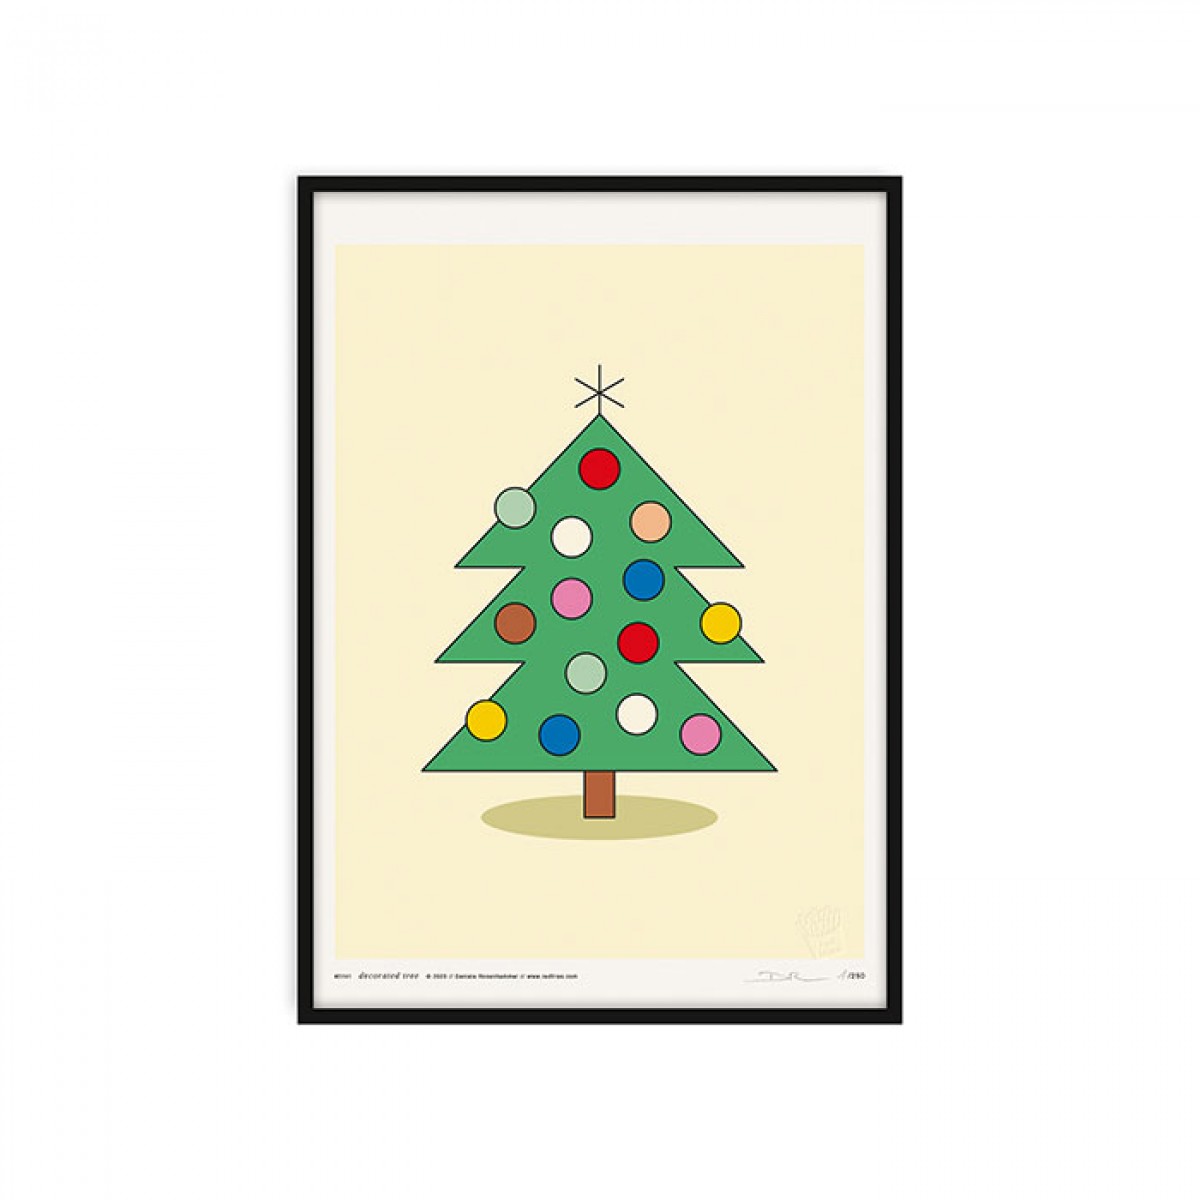 redfries decorated tree yellow a3 – Kunstdruck DIN A3